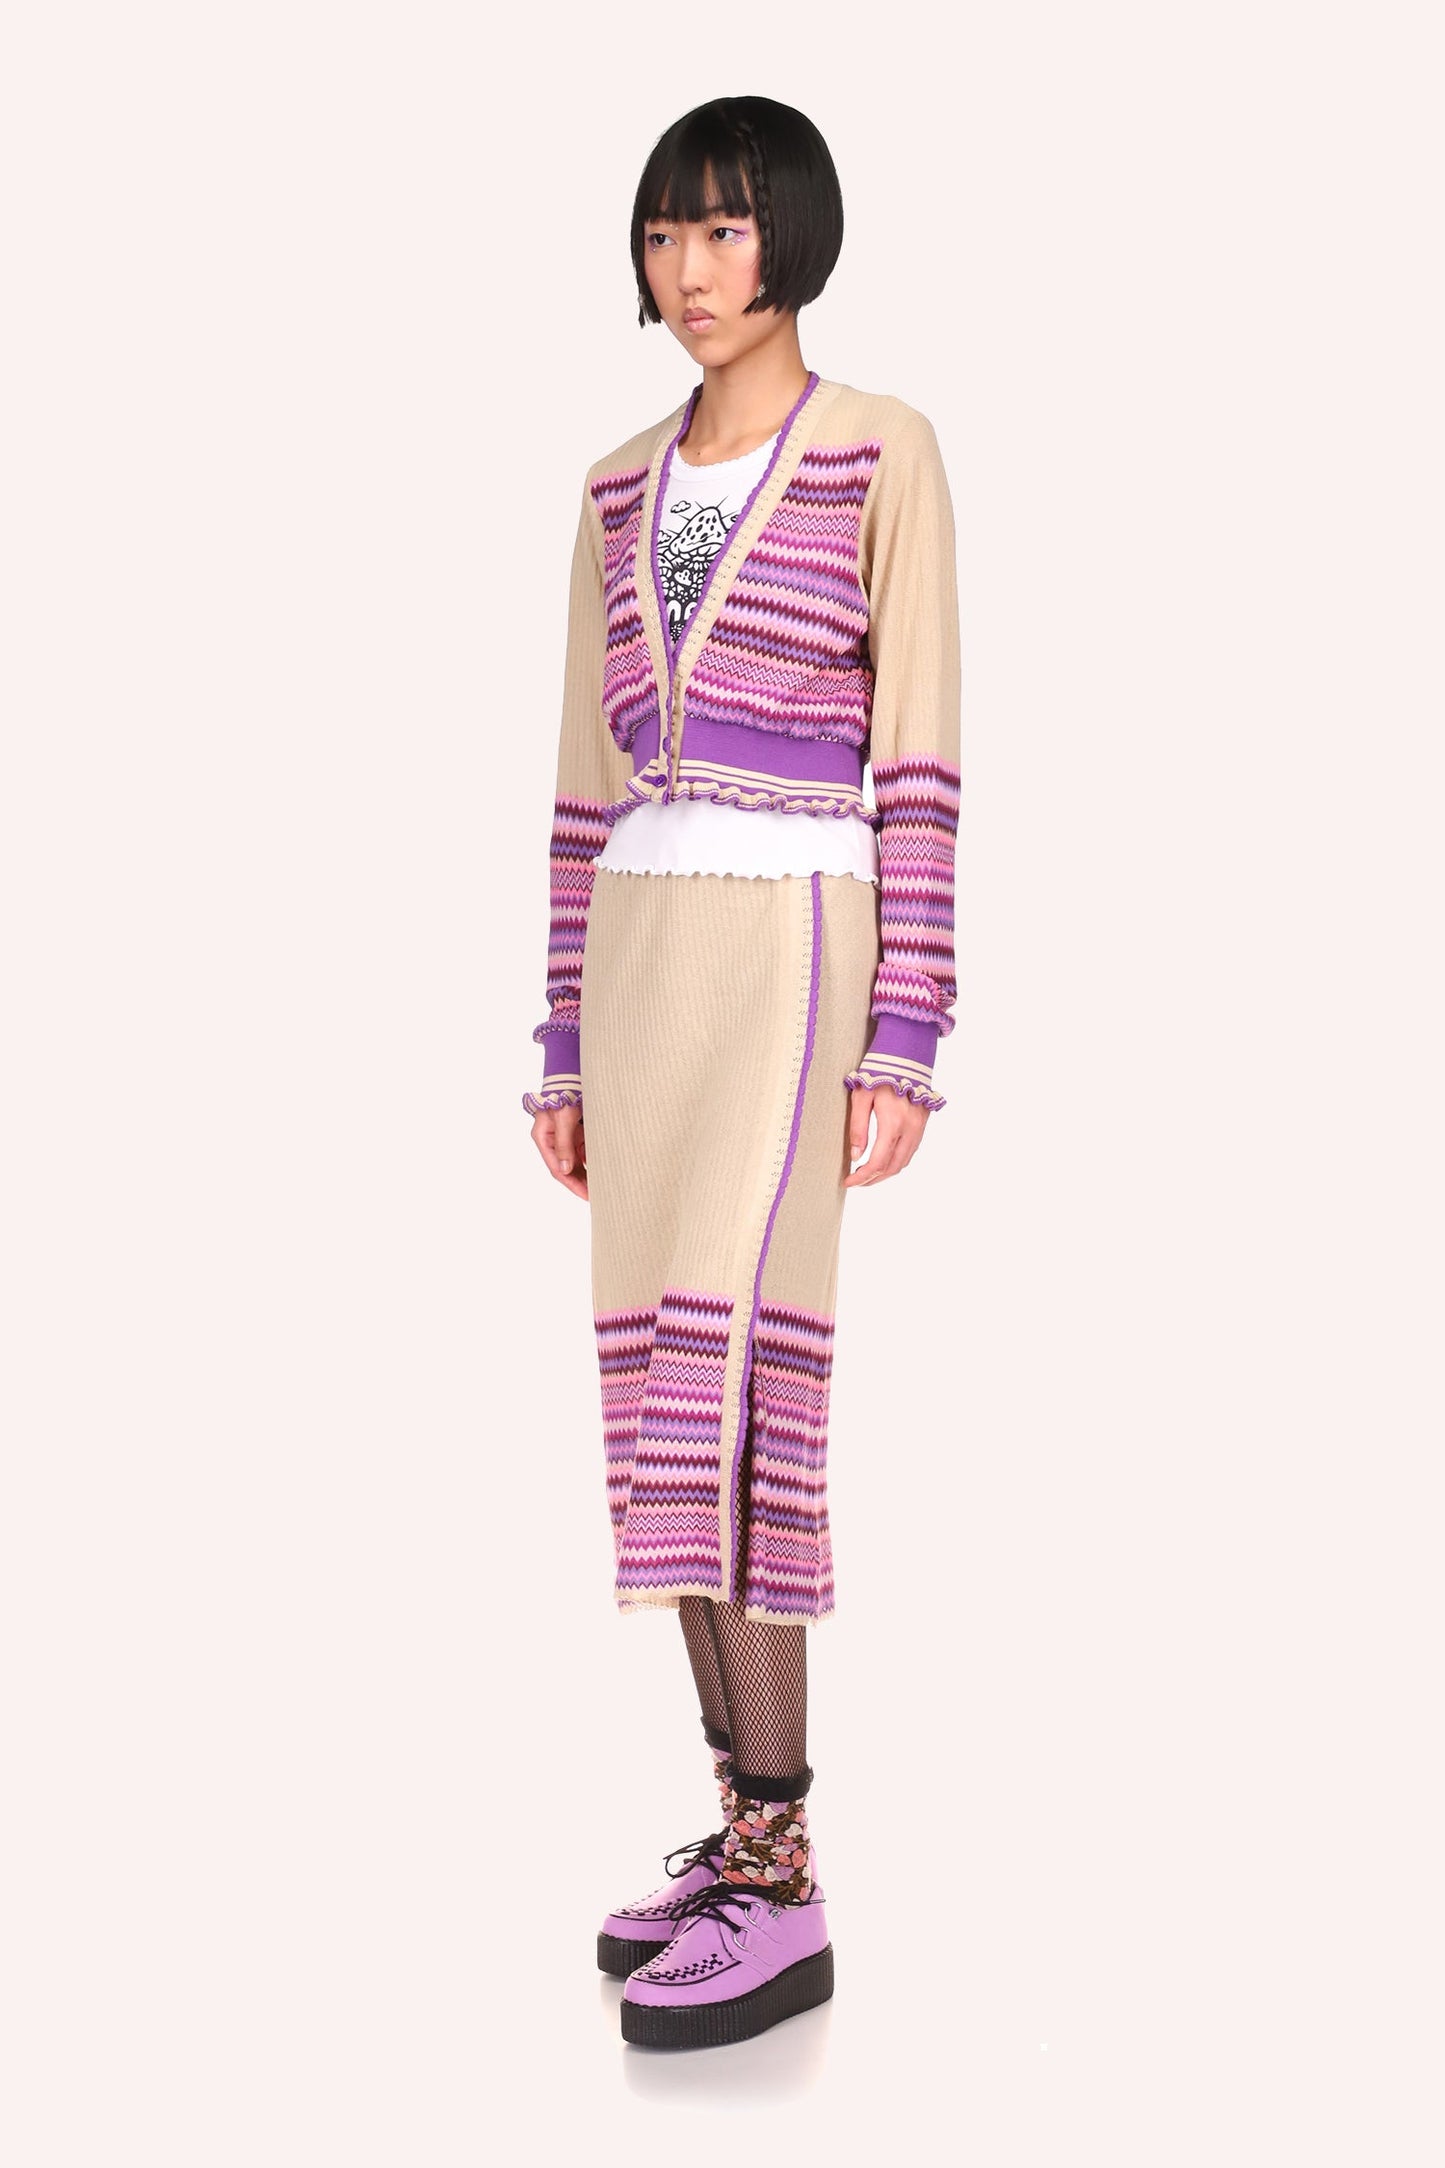 Tonal Zigzag Skirt lavender zigzag is lines of hue of lavender around the bottom of the dress